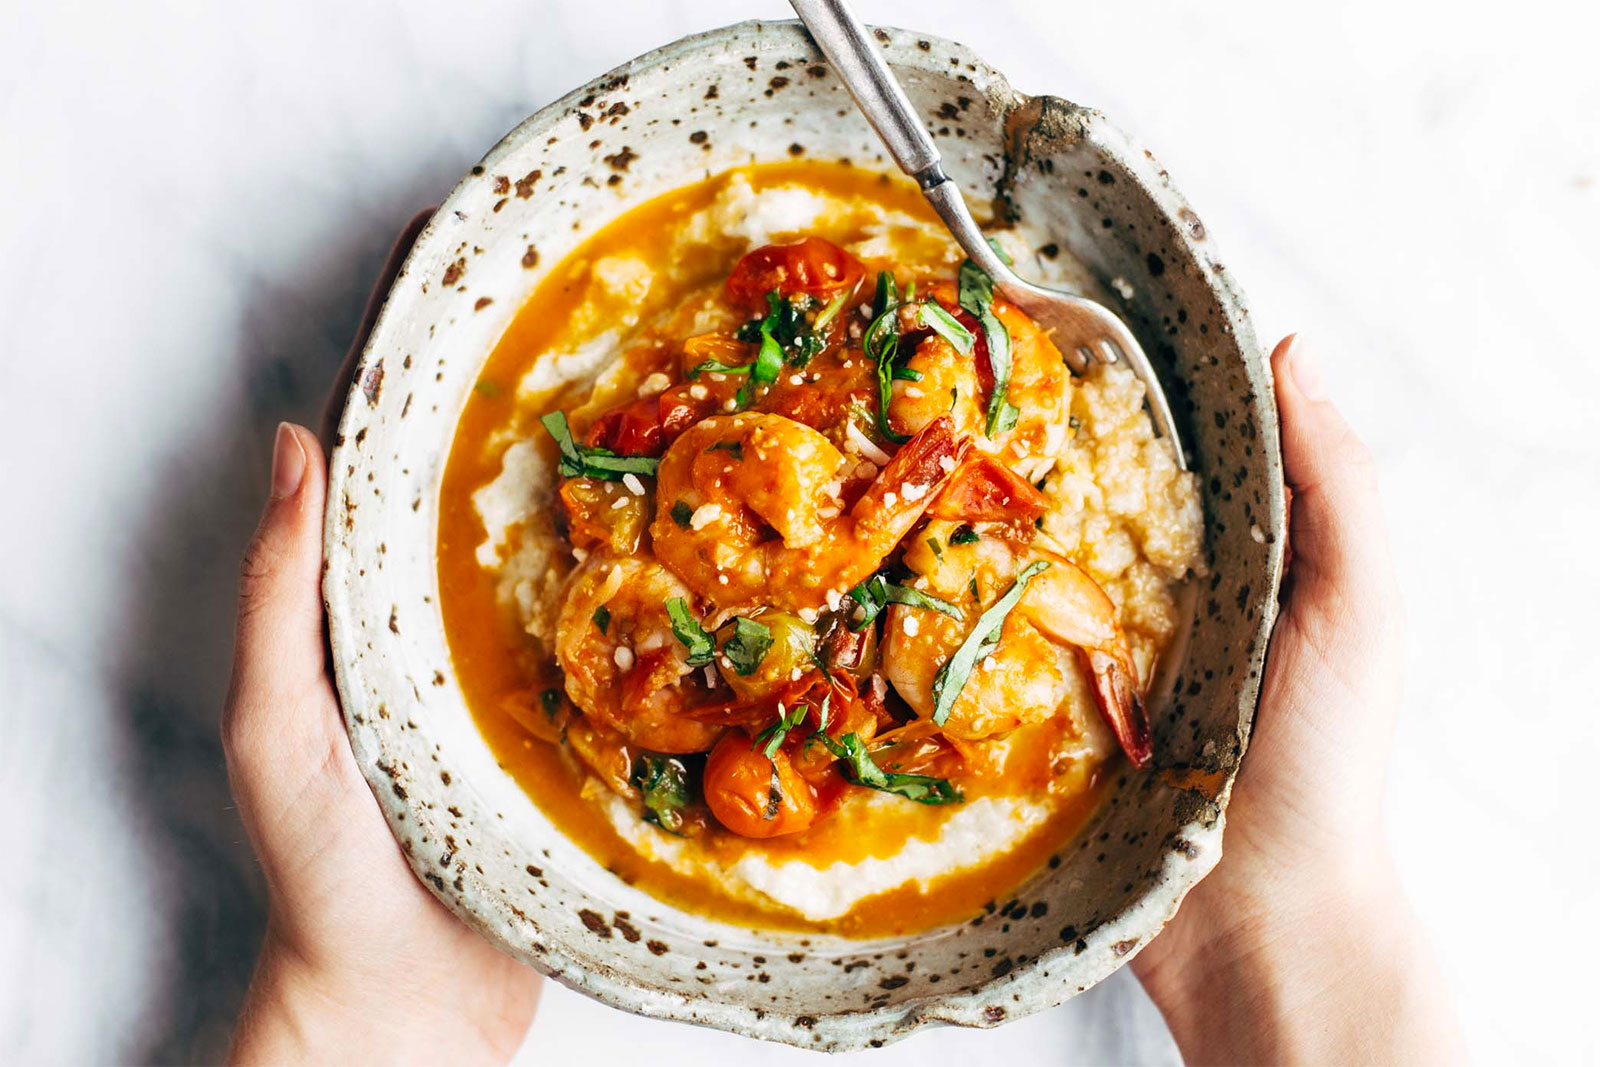 🍴 You Can Eat Dinner Only If You Score at Least 8/16 on This Quiz Shrimp and Grits1